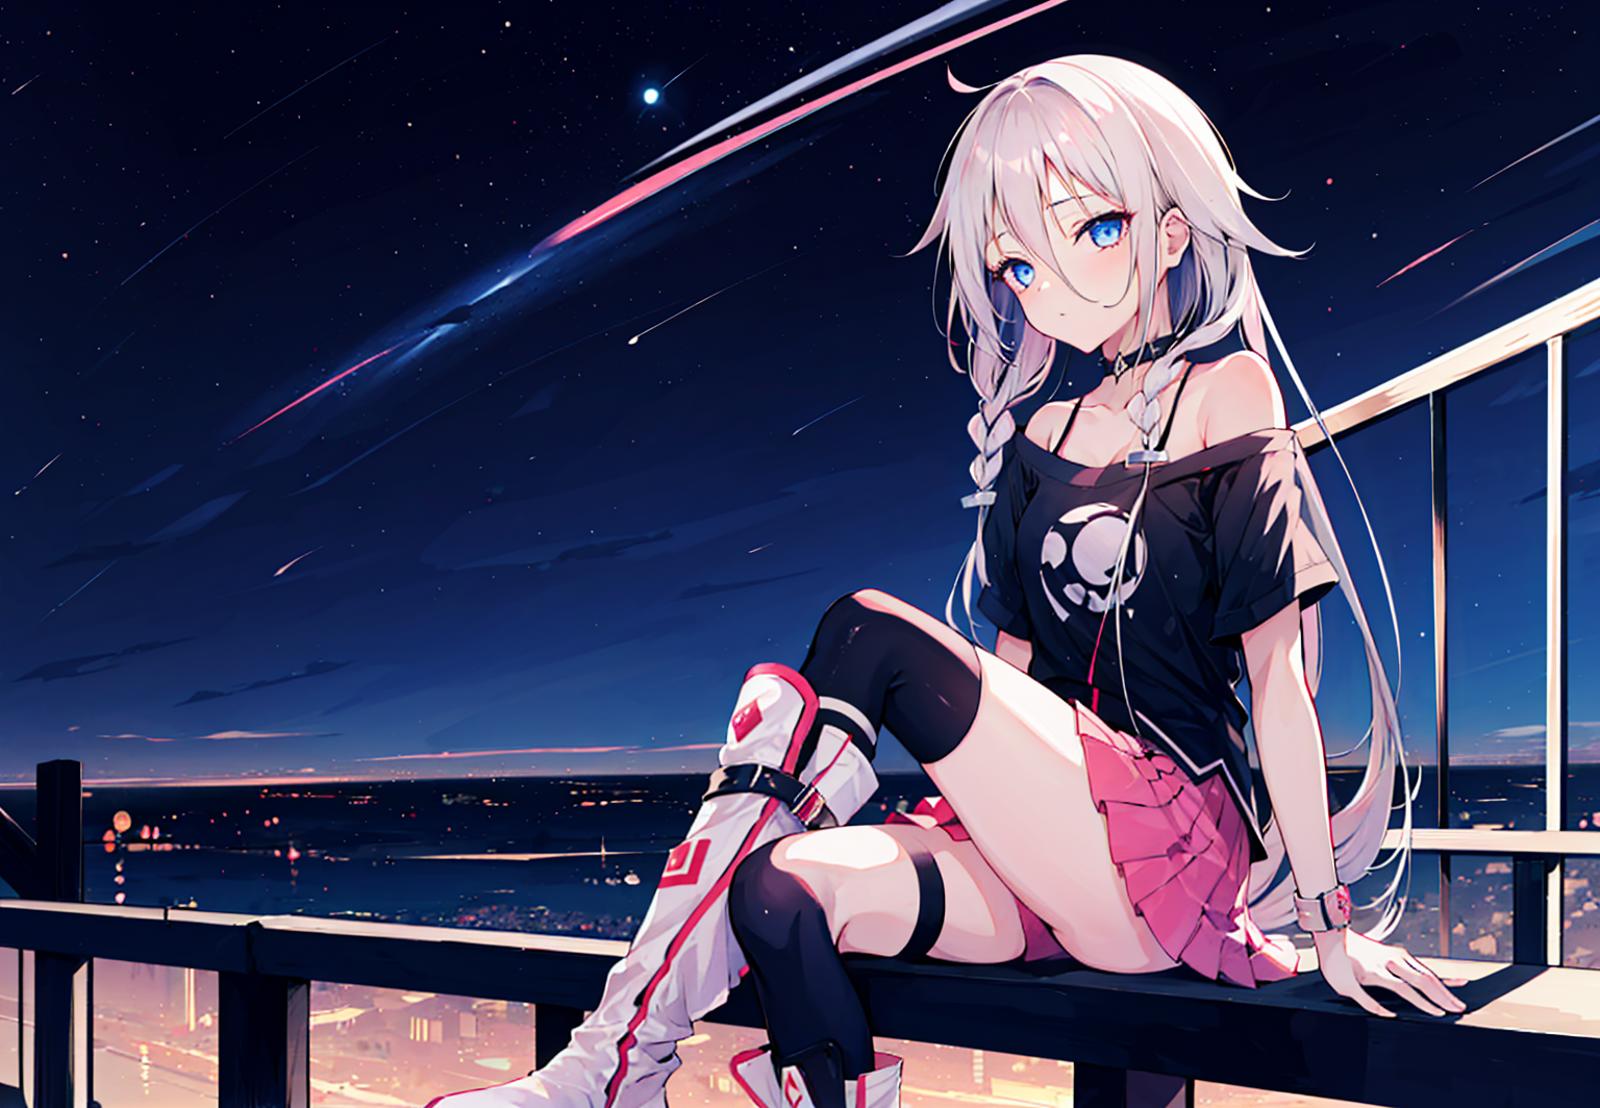 IA イア - Vocaloid image by fallenL